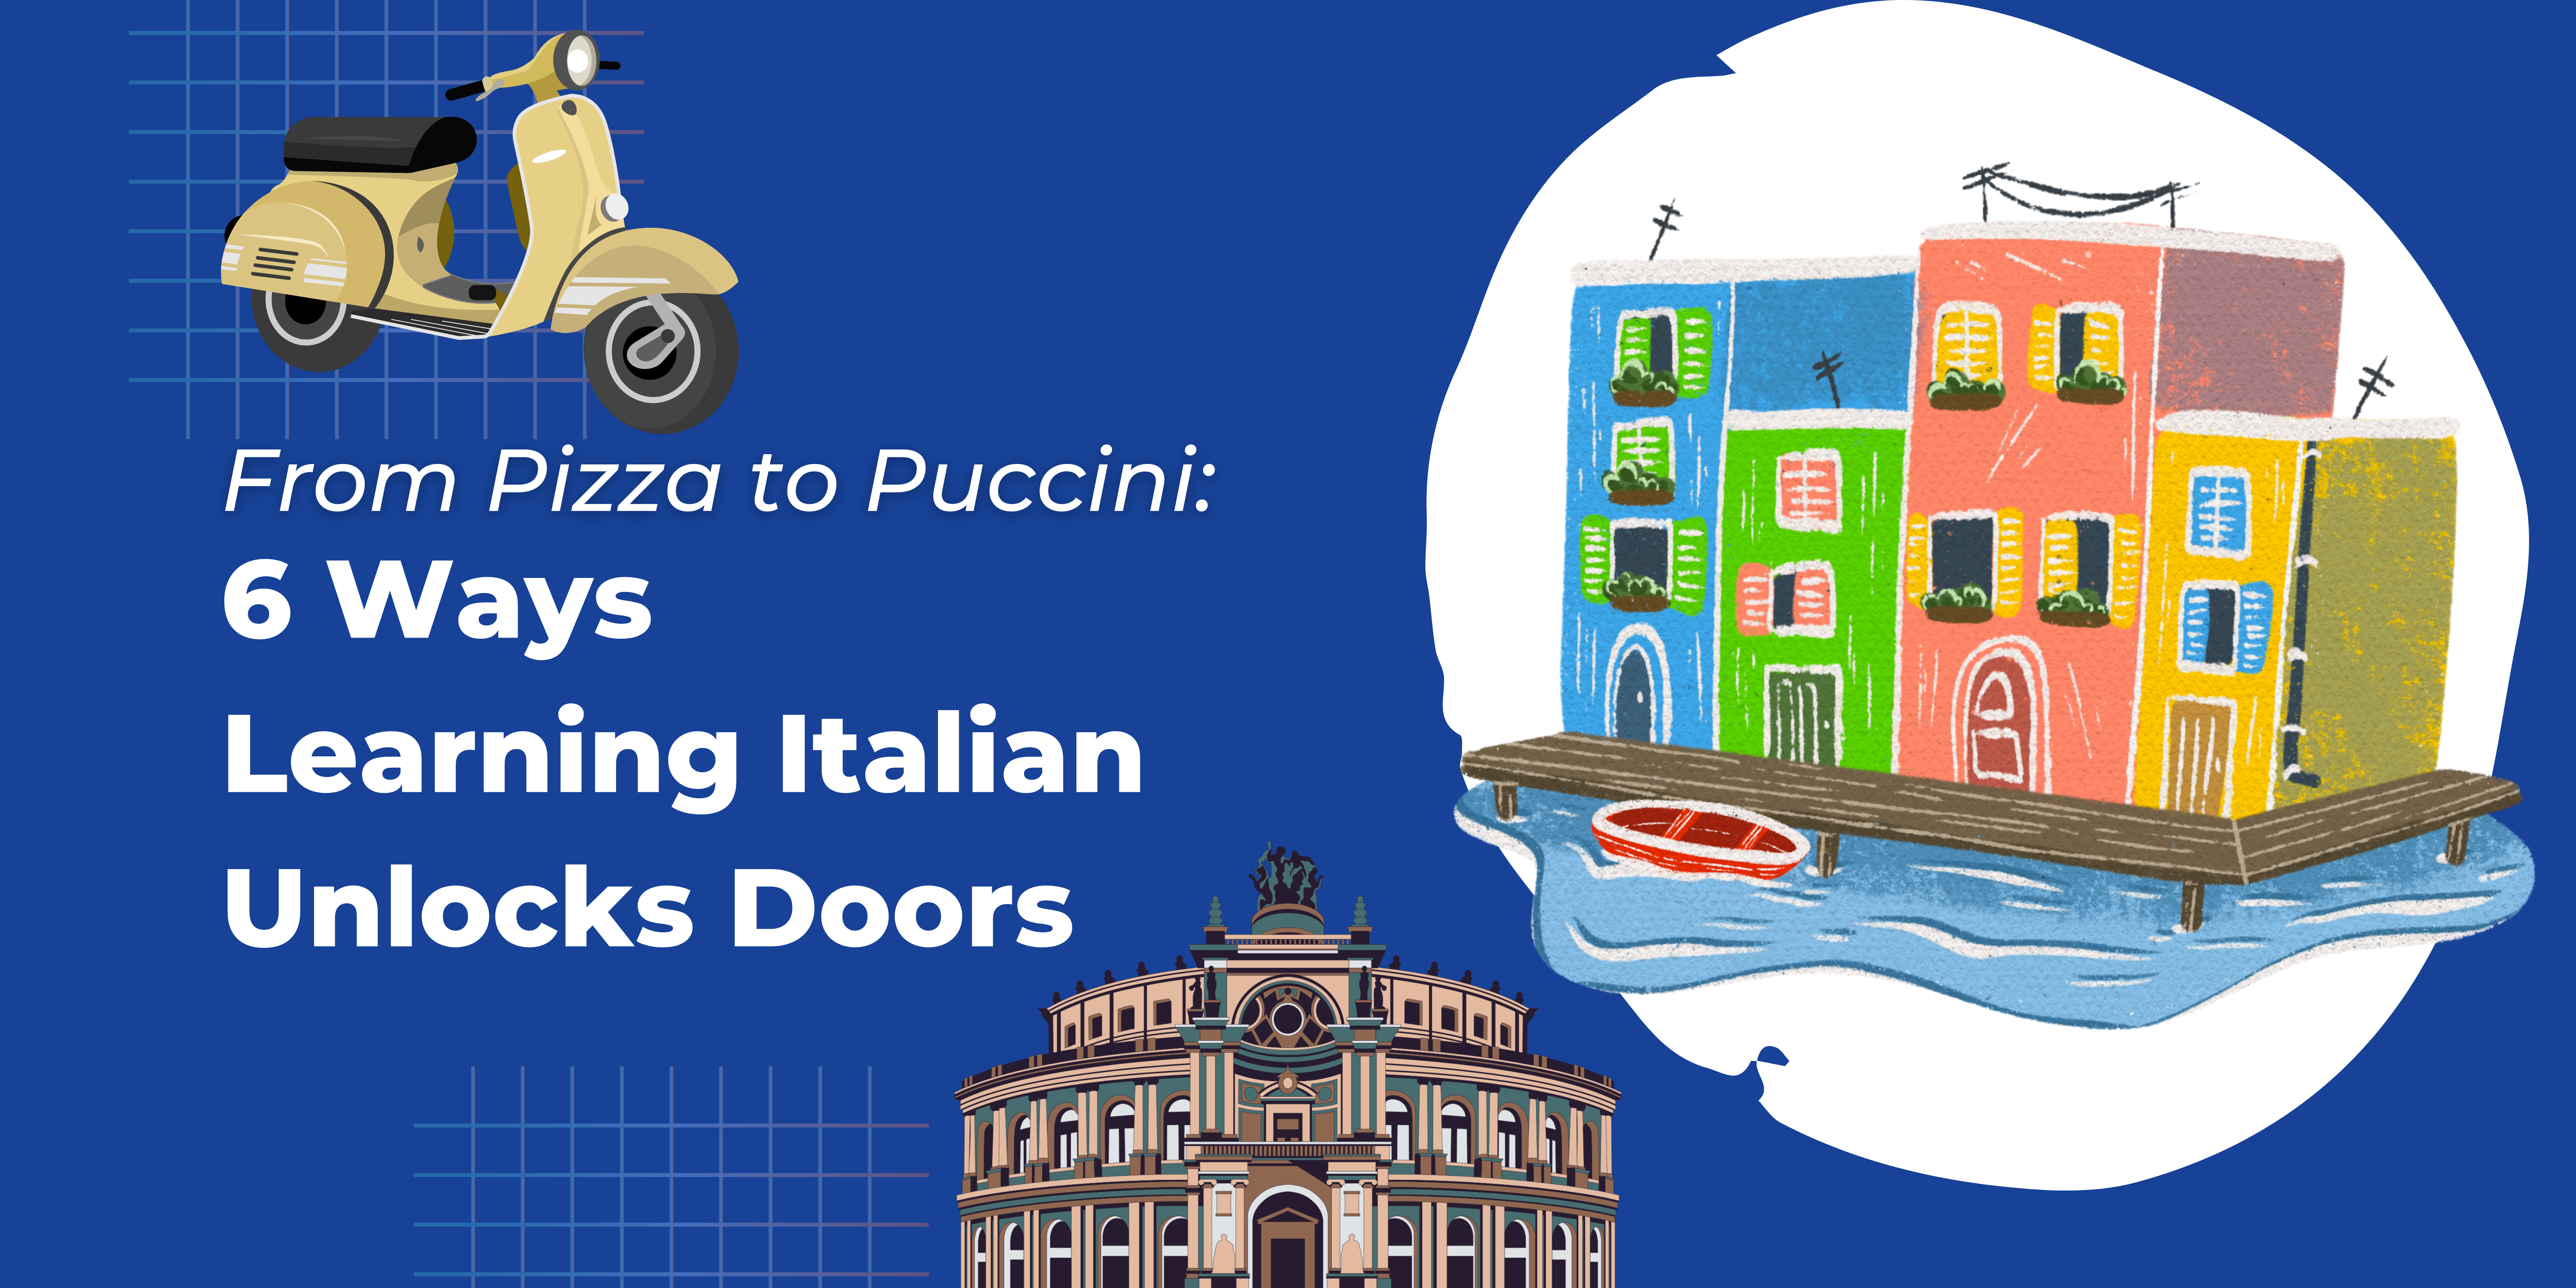 6 Ways Learning Italian Unlocks Doors: From Pizza to Puccini